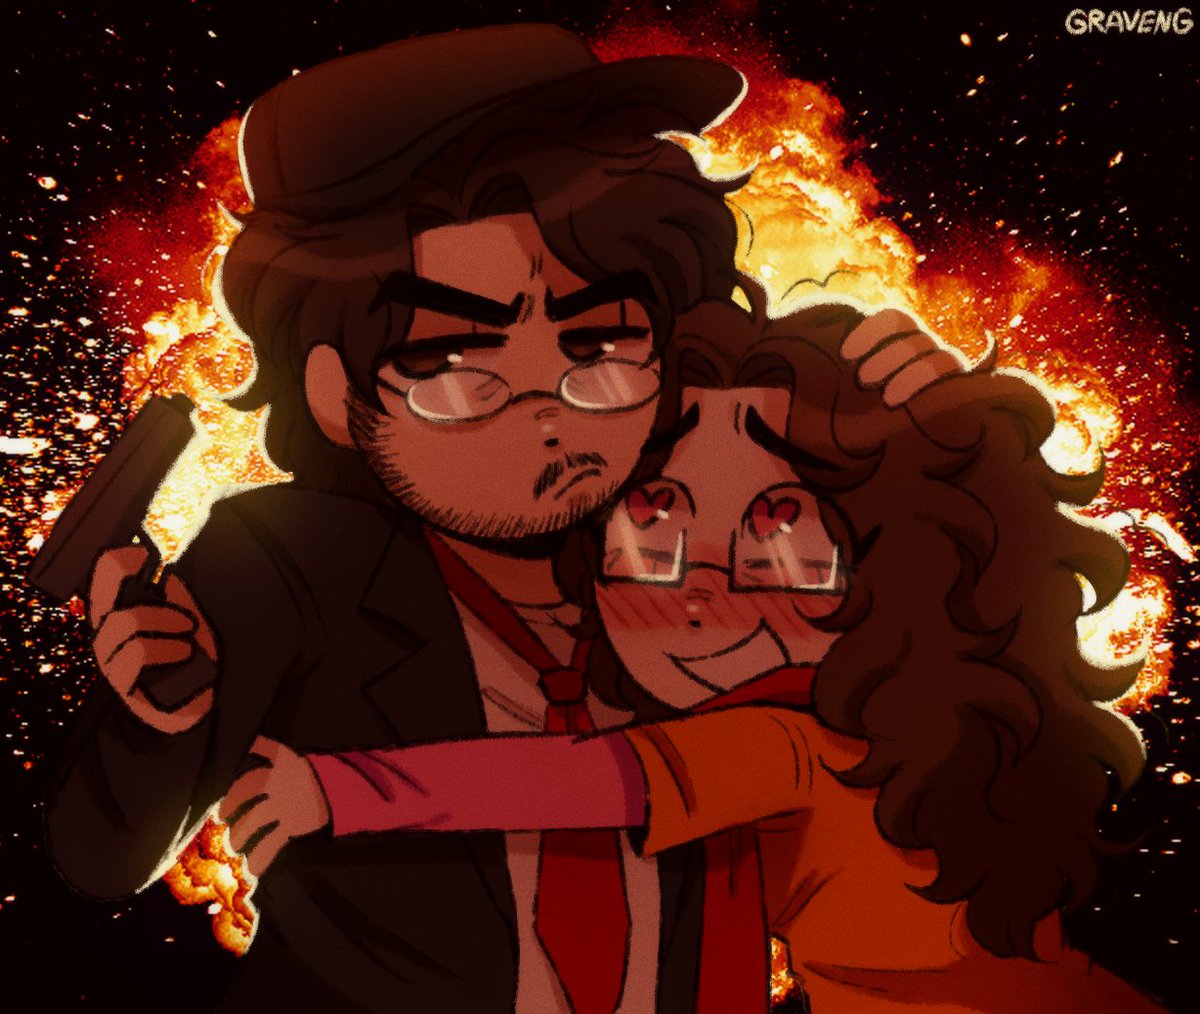 me and my boyfriend as the nostalgia critic and hyper fangirl

#channelawesome #nostalgiacritic #art